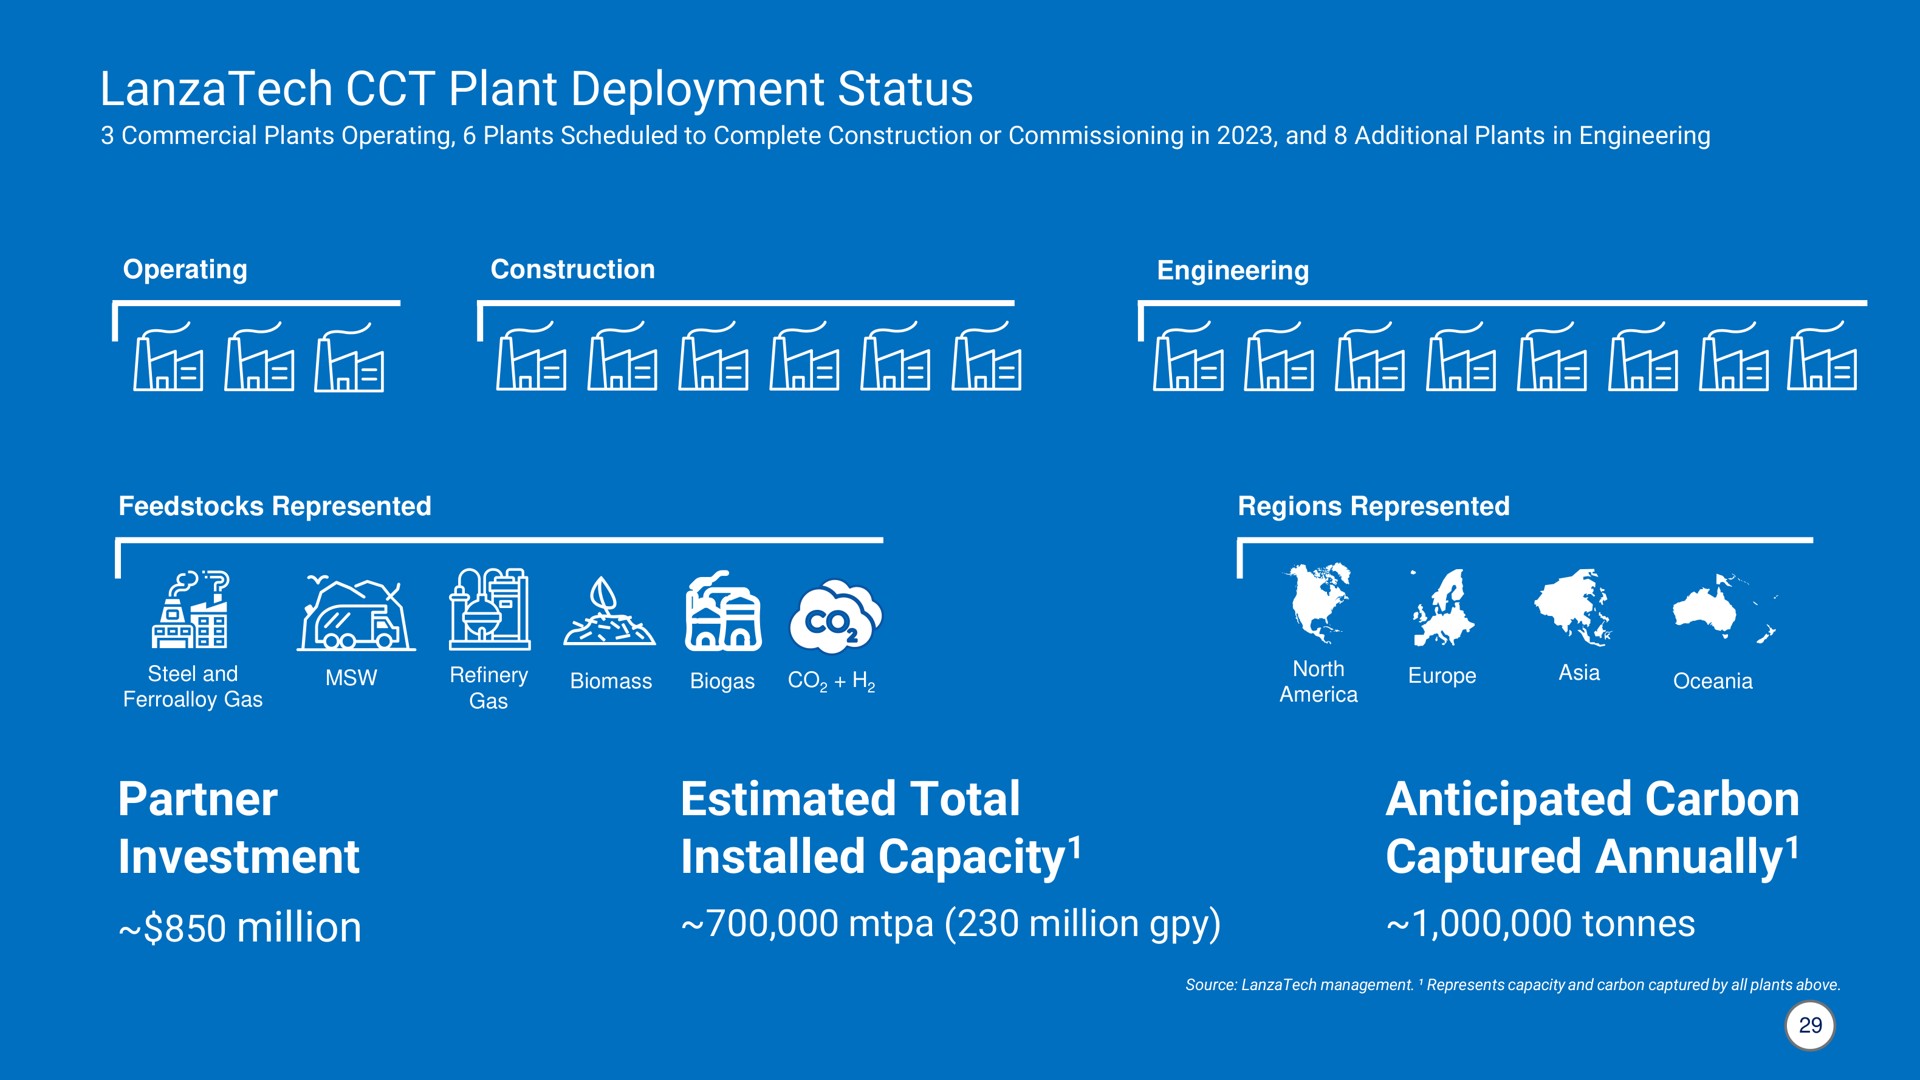 plant deployment status partner investment estimated total capacity anticipated carbon captured annually on sen see epee a eel capacity annually | LanzaTech